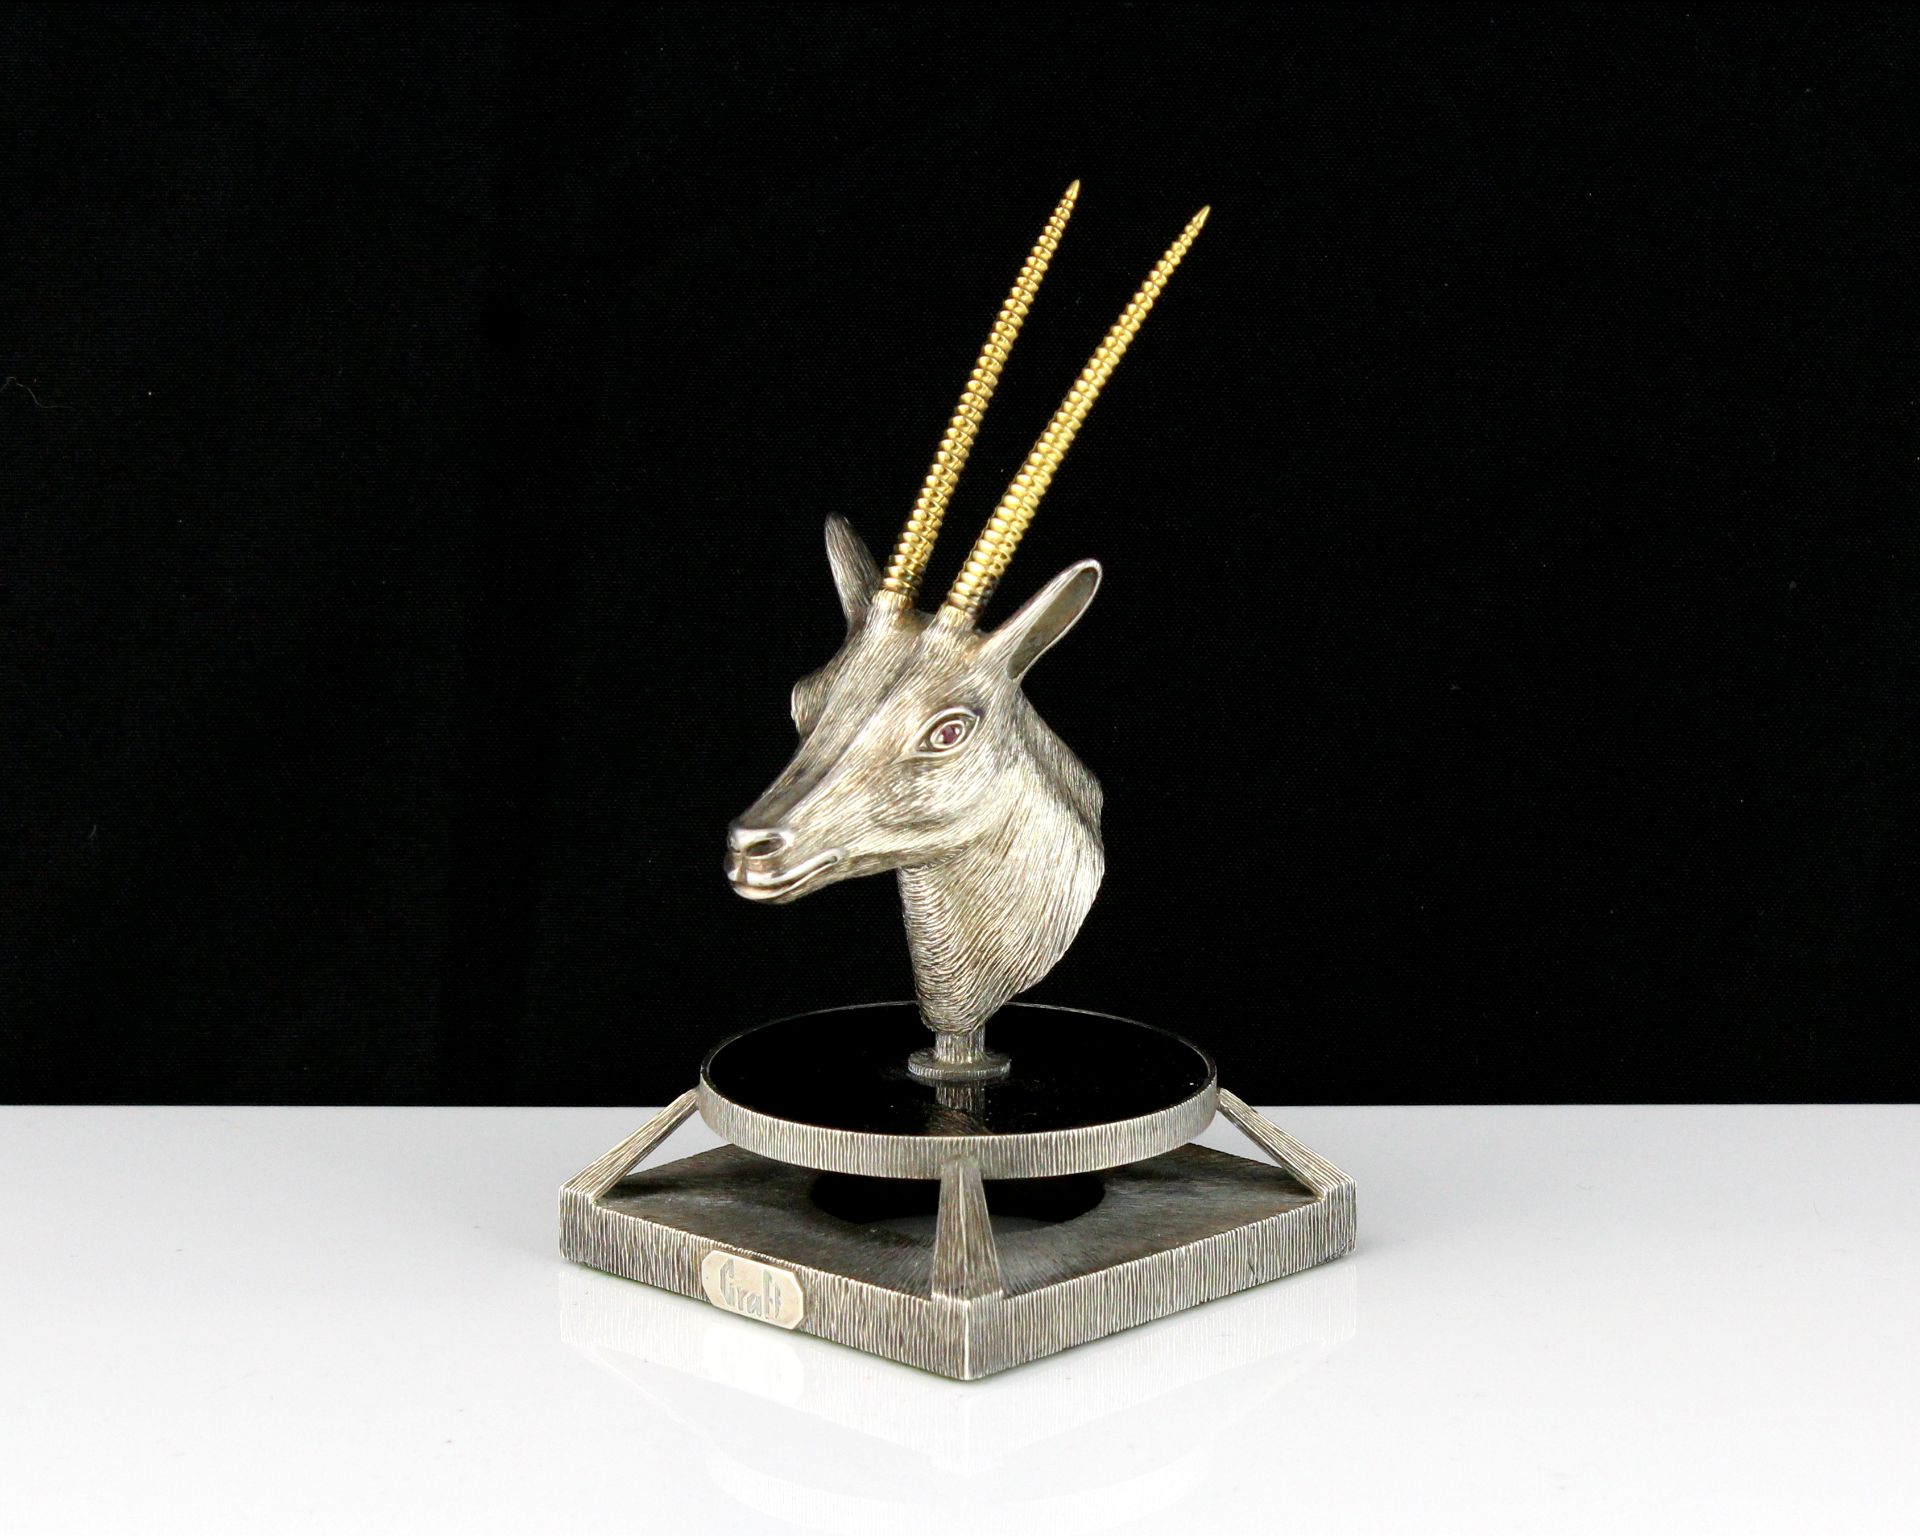 A jewelled silver oryx head statue signed Graff designed as the head of an oryx cast in silver